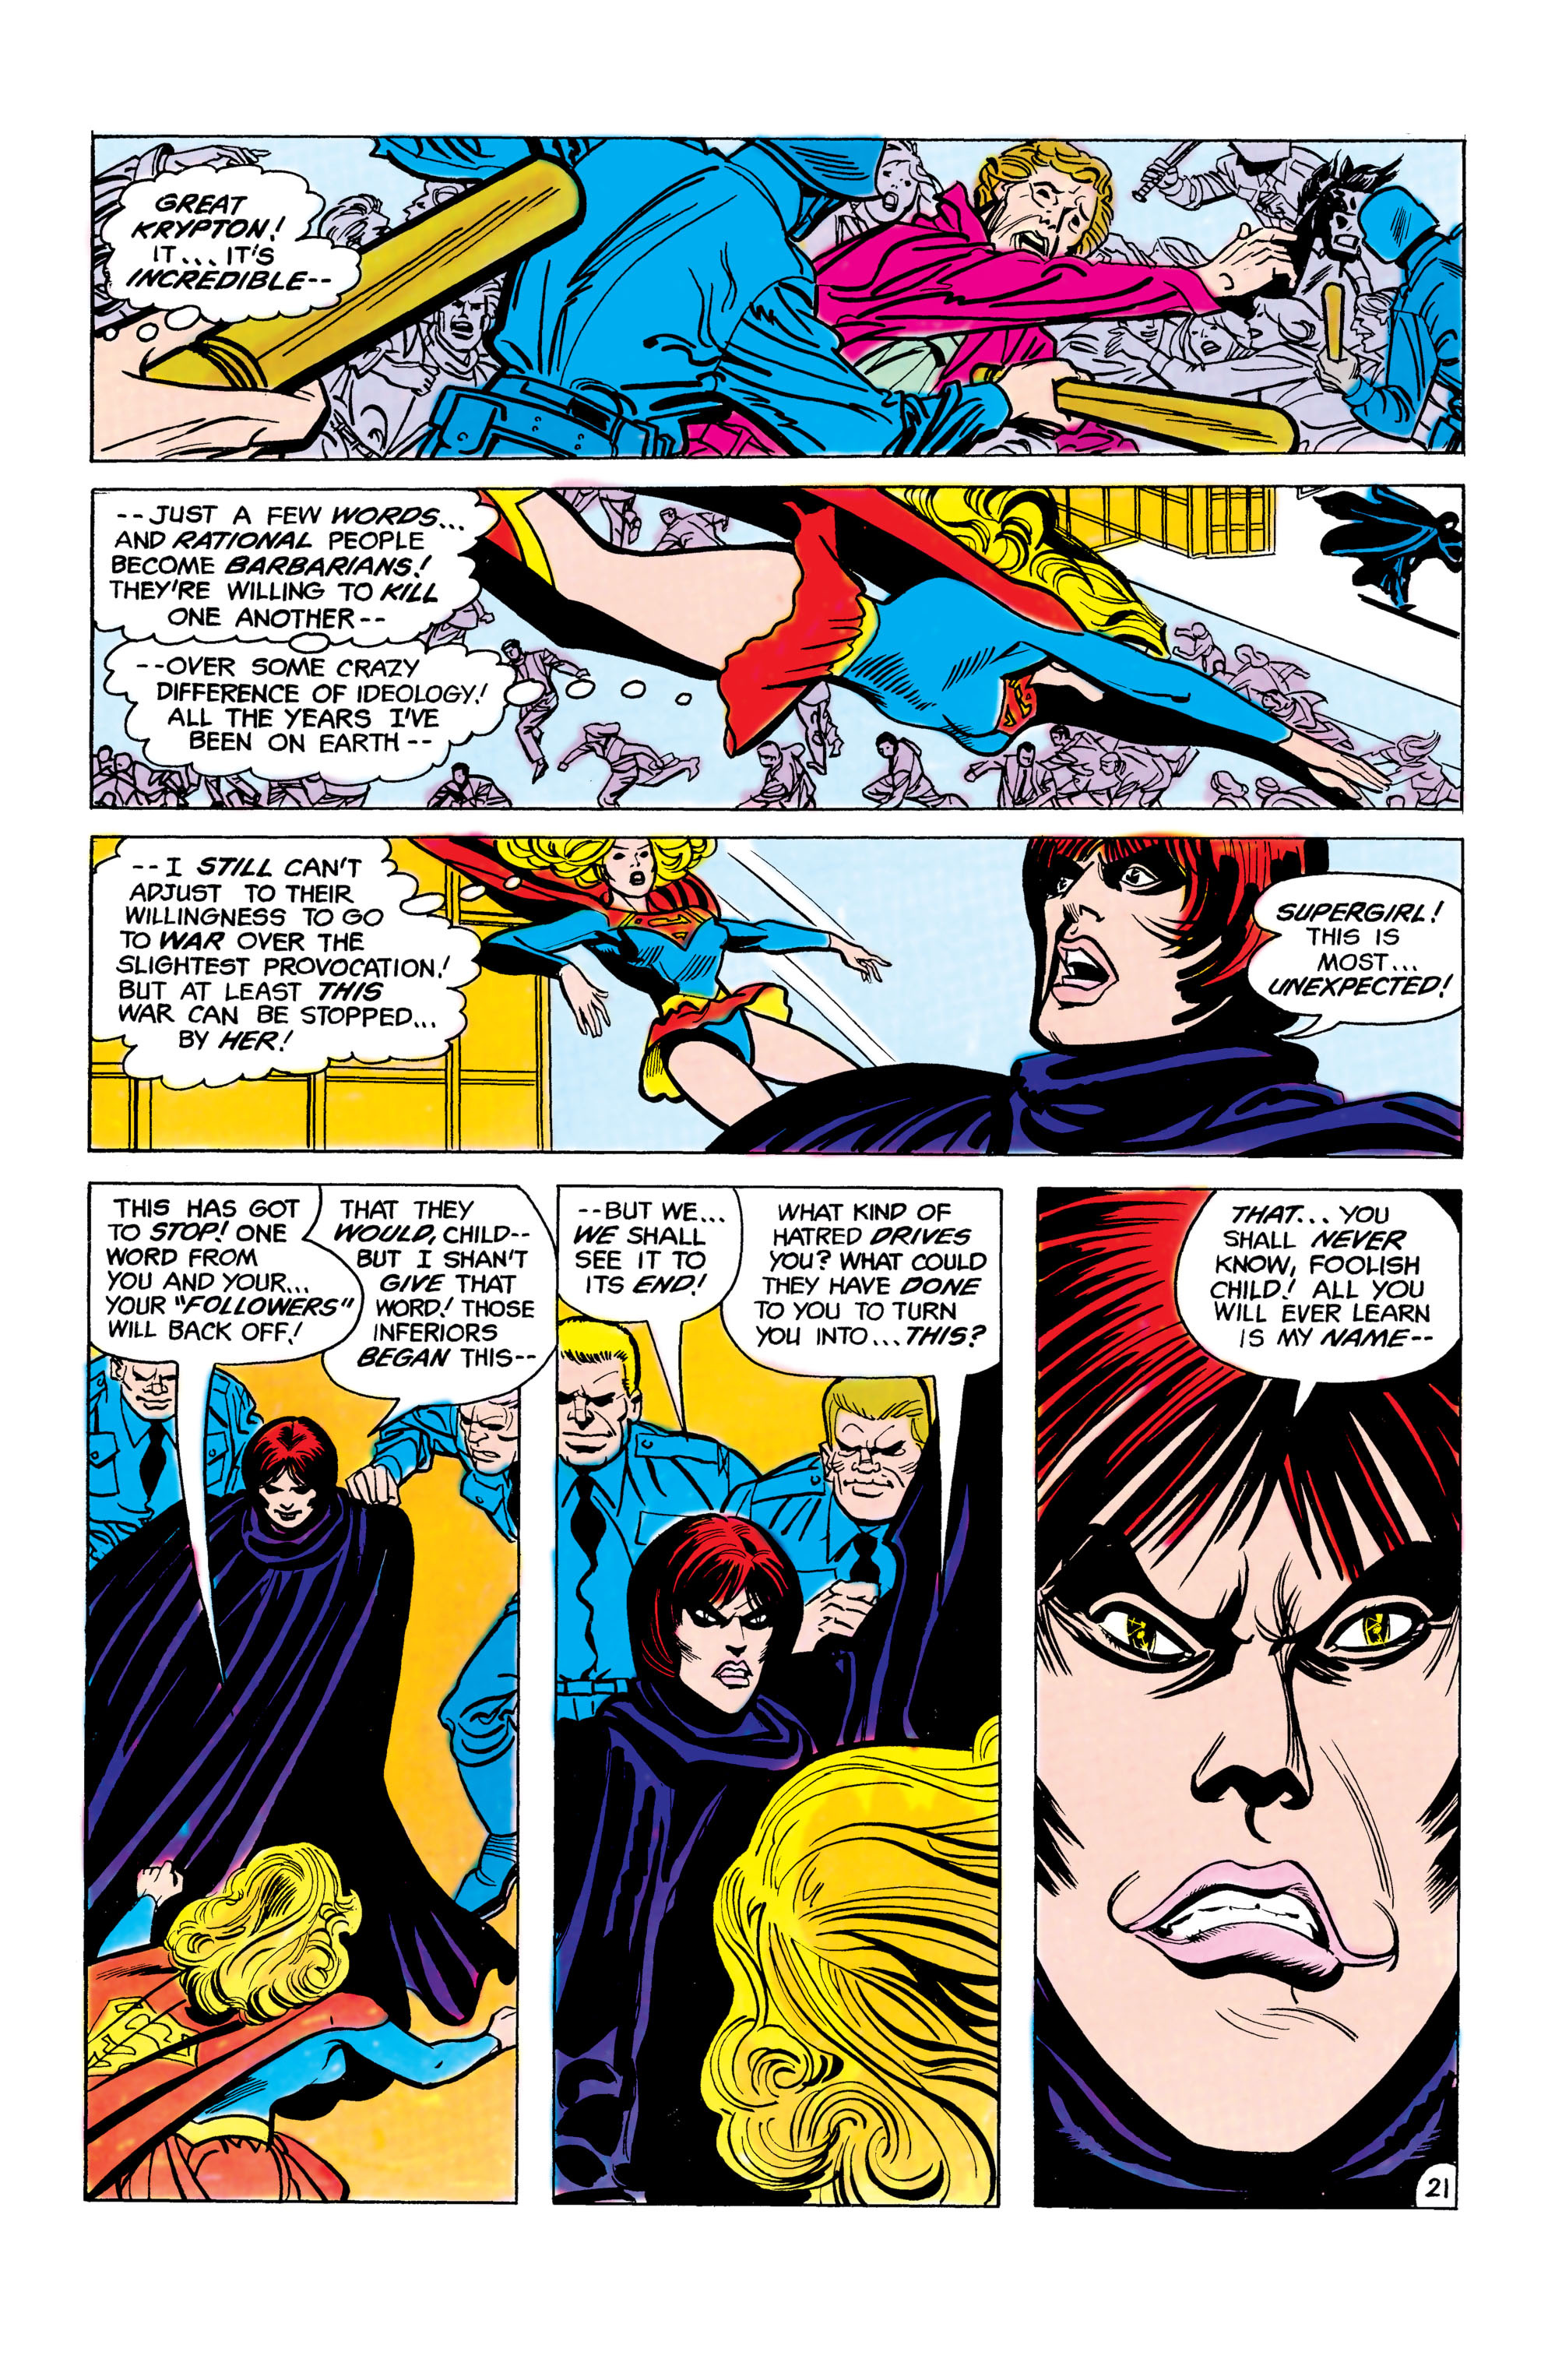 Supergirl (1982) 13 Page 21